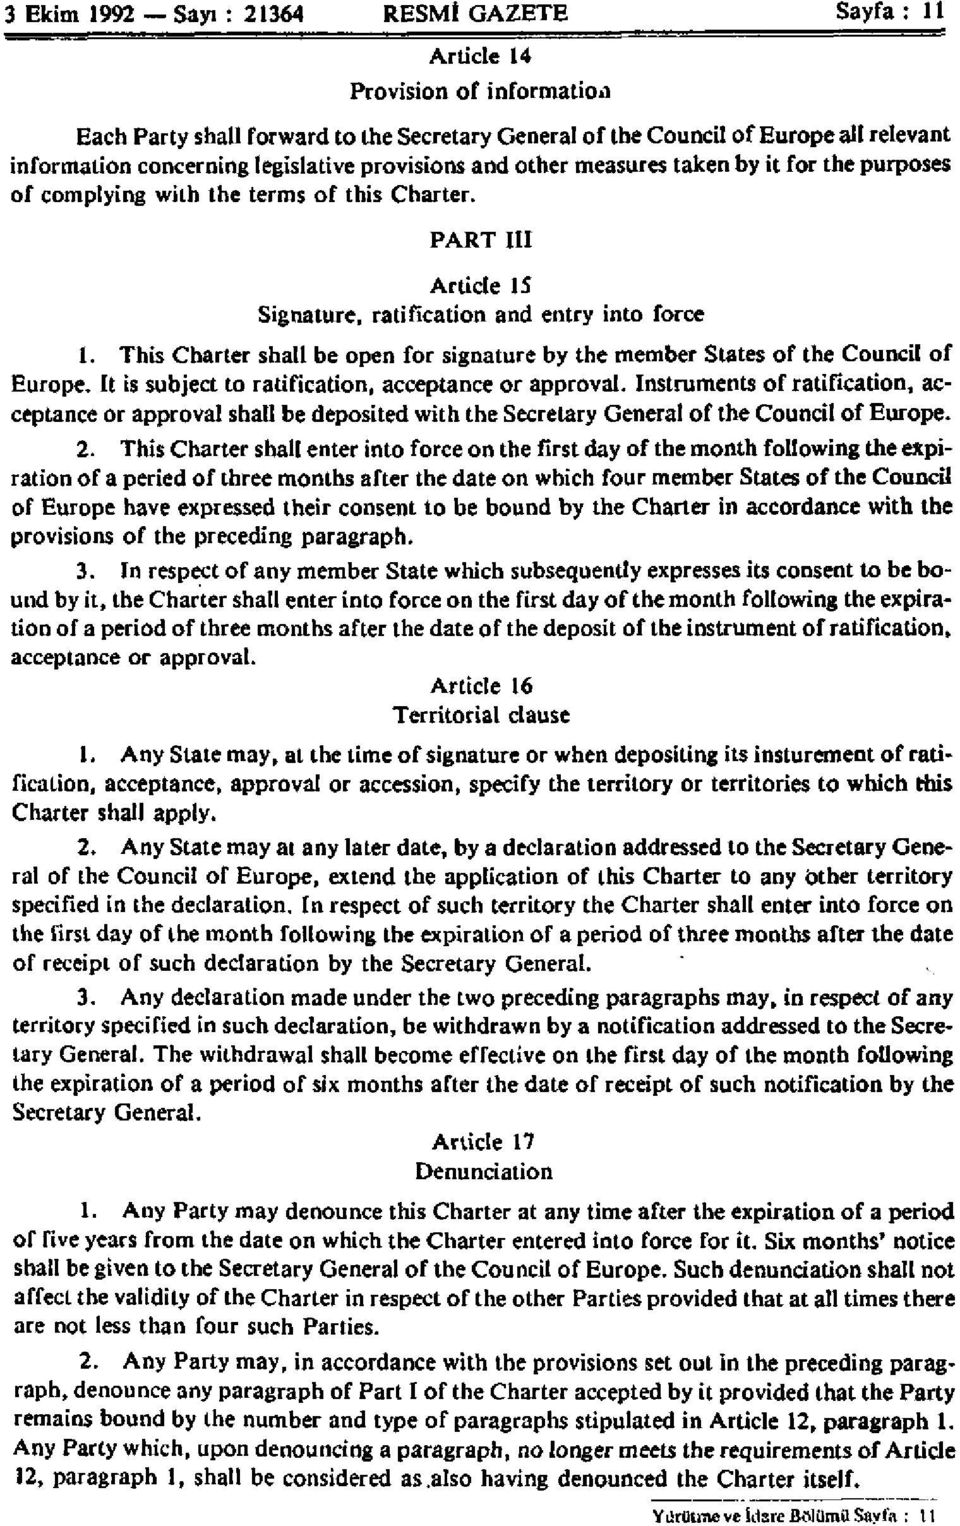 This Charter shall be open for signature by the member States of the Council of Europe. It is subject to ratification, acceptance or approval.